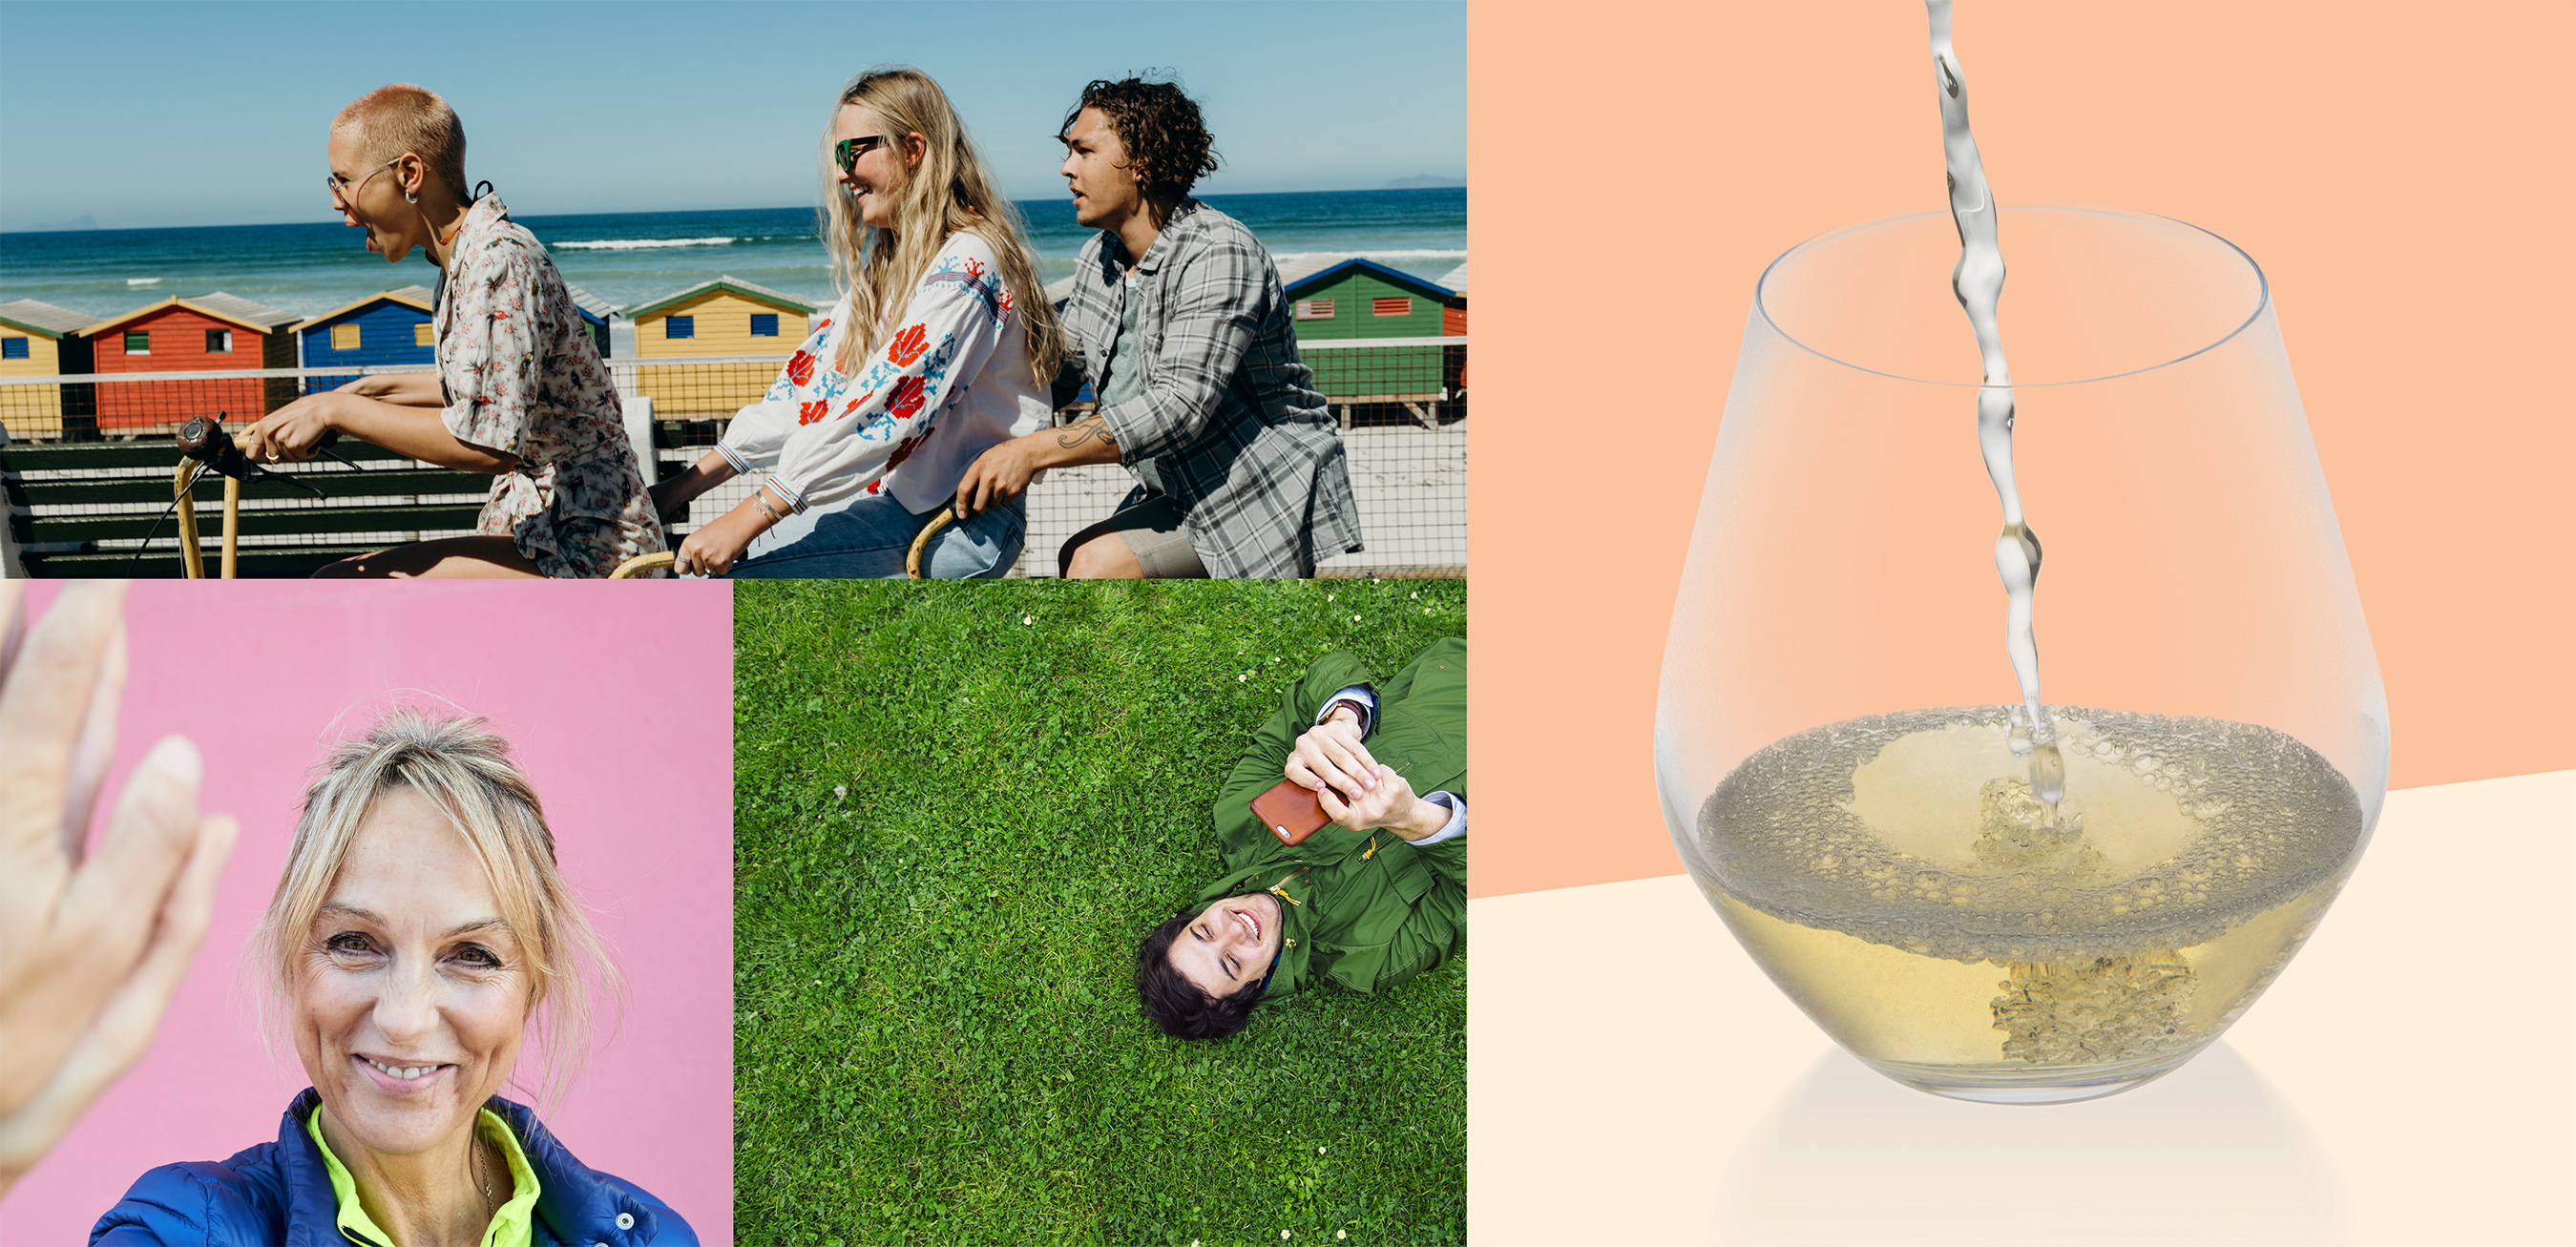 Collage of images: people biking, a woman high-fiving someone, a person lying in a grass field, and a drink